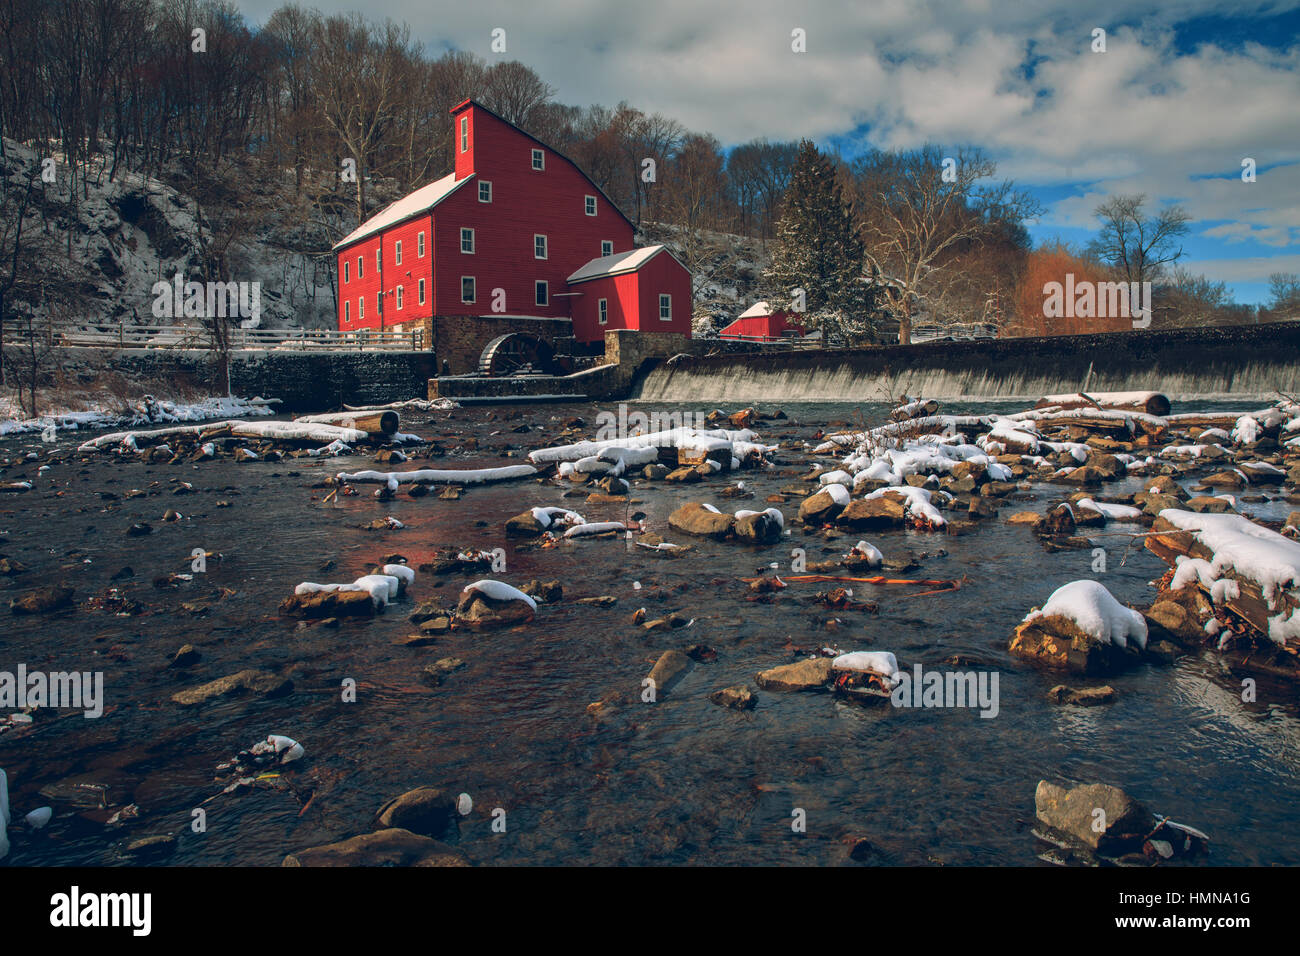 New Jersey, USA. 9th Feb, 2017. The Red Mill in Clinton New Jersey, overlooking the Raritan River, is covered in snow shortly after Winter Storm Niko dissipated. Credit: Jimmy Kastner/Alamy Live News Stock Photo